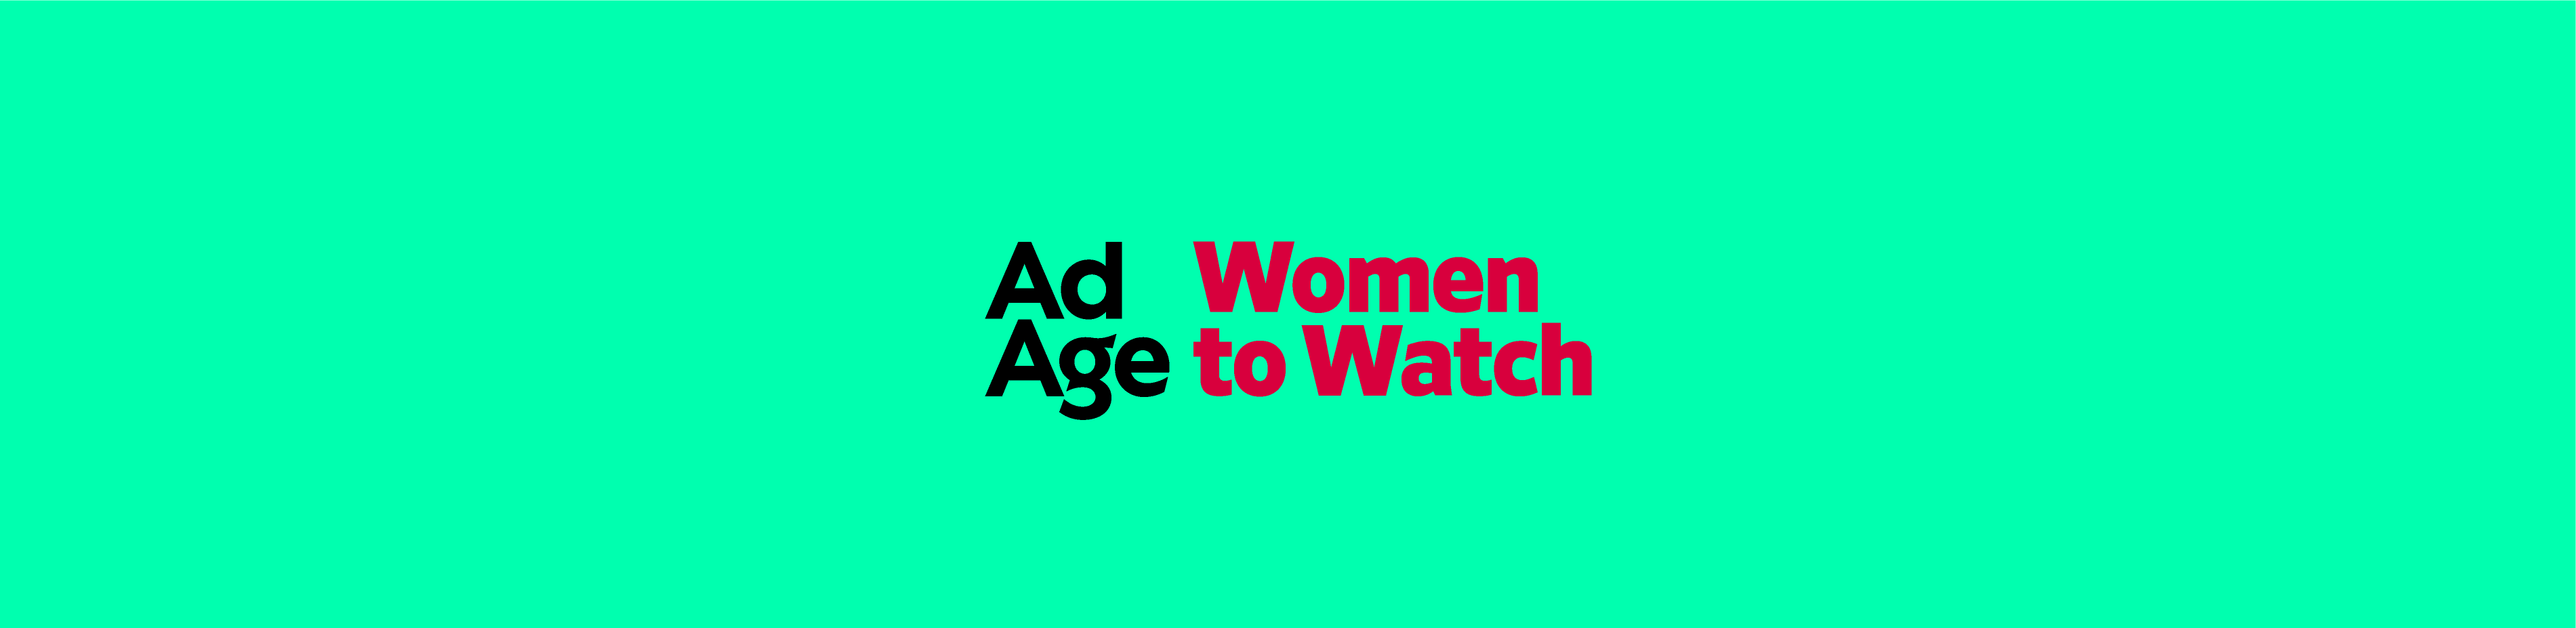 Ad Age Women To Watch